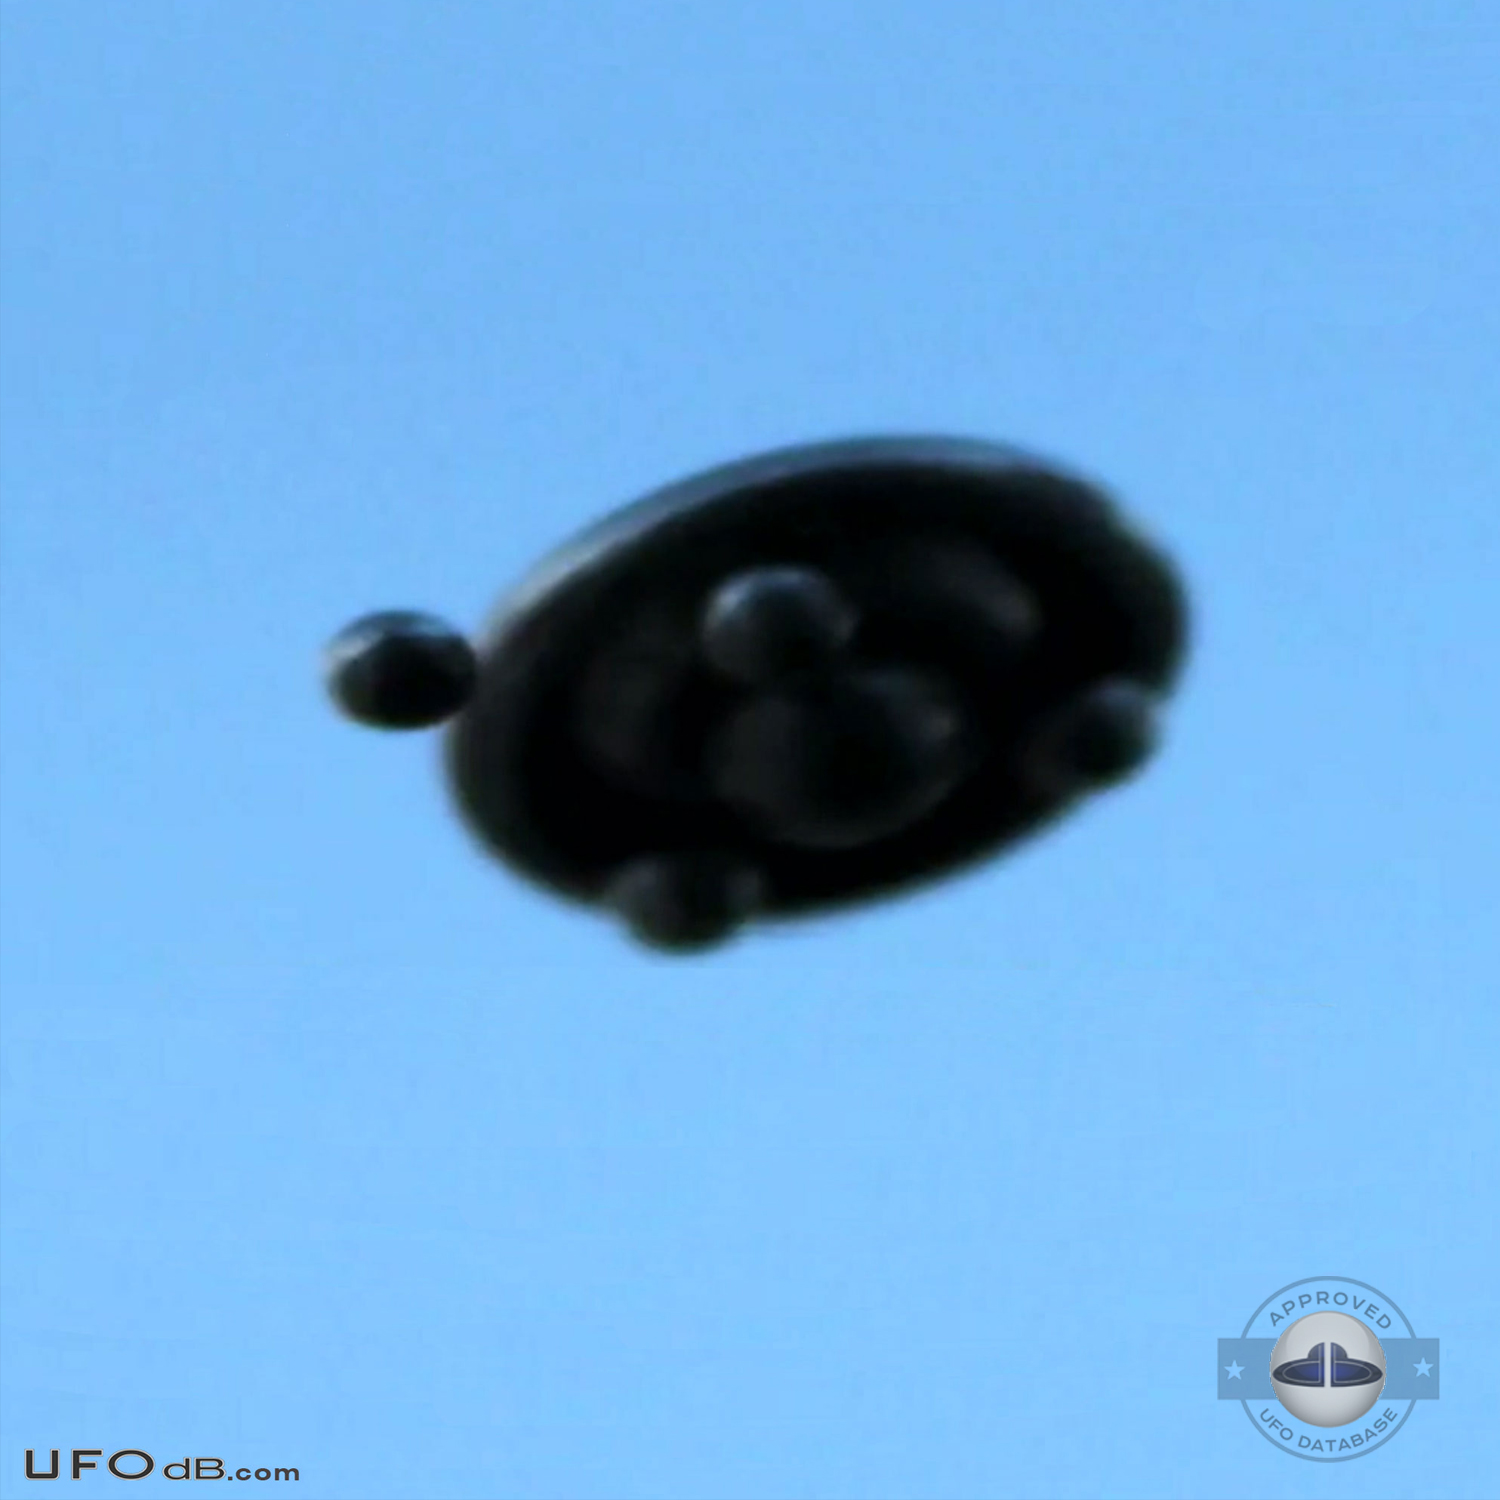 Italian UFO hunter captures on pictures a great 2011 UFO sighting UFO Picture #372-1